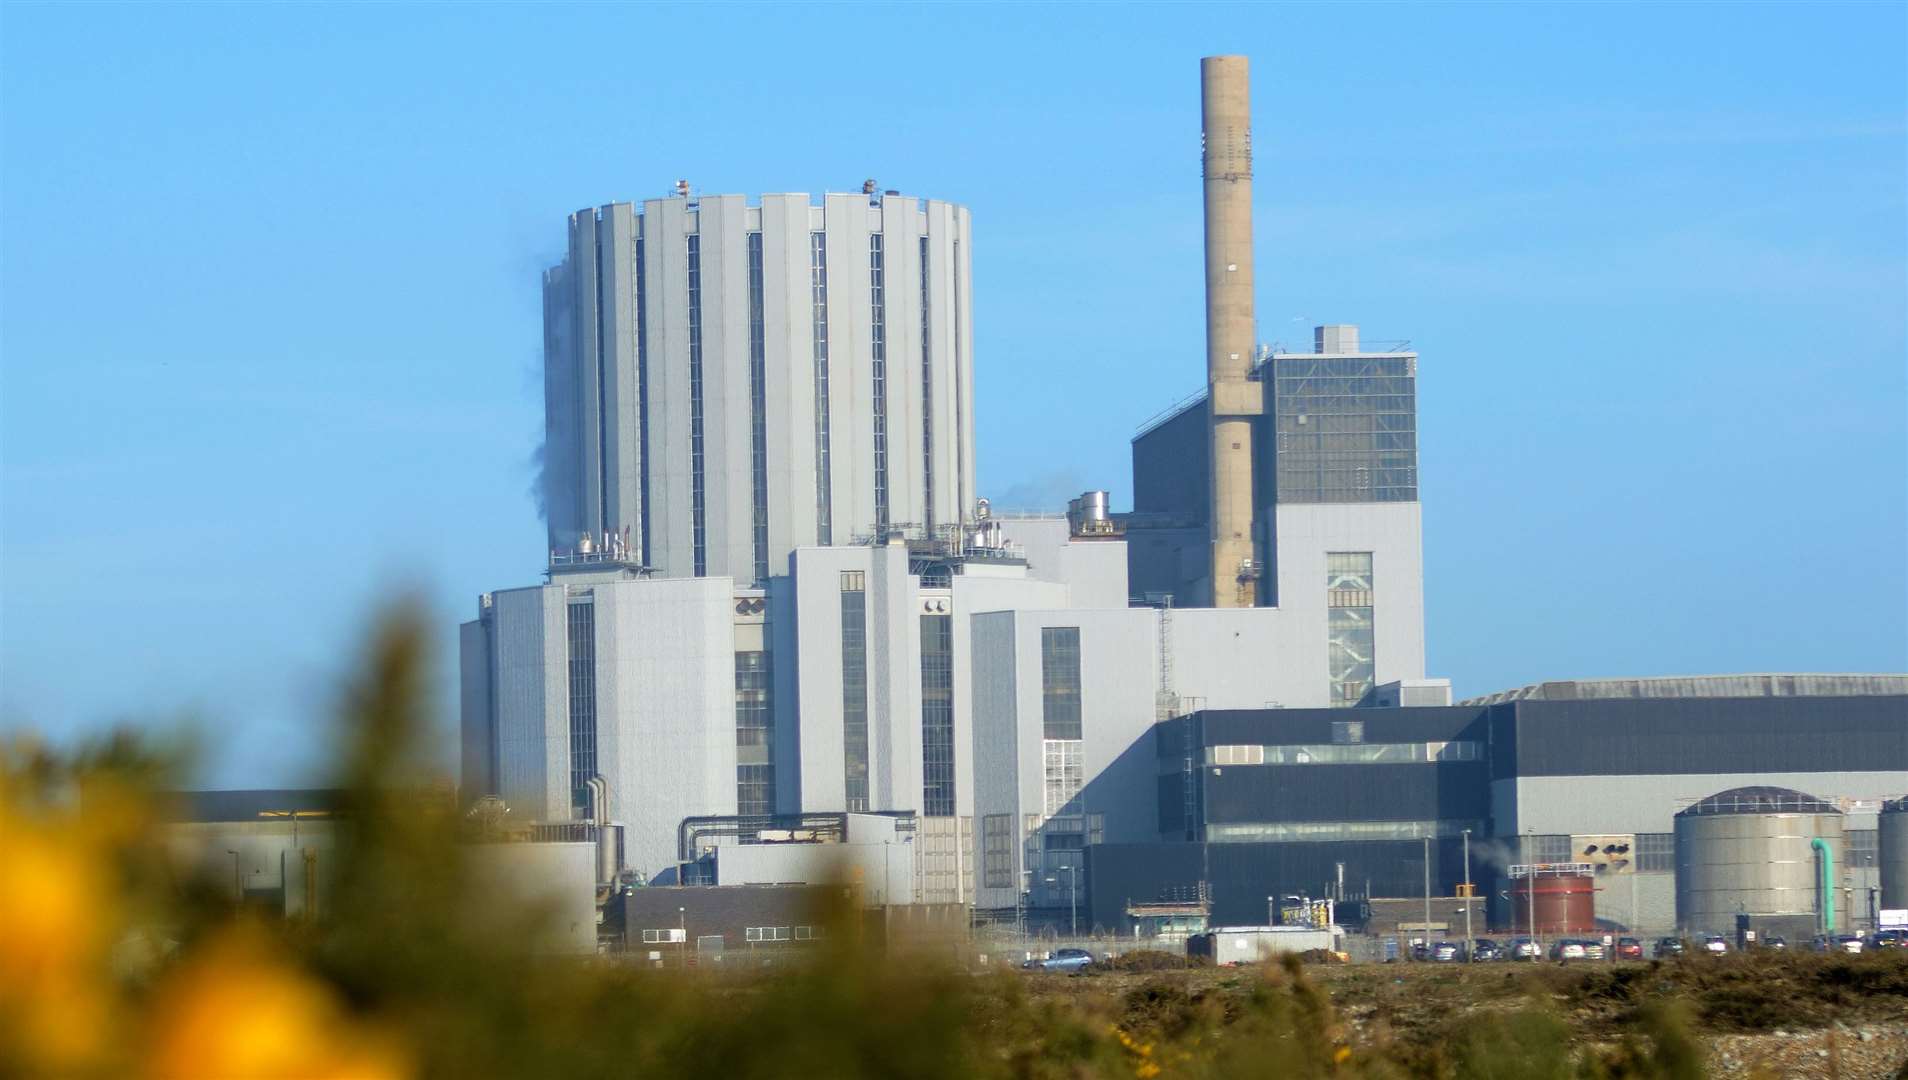 Dungeness B Power Station is in the process of defuelling, and stopped energy production in 2021